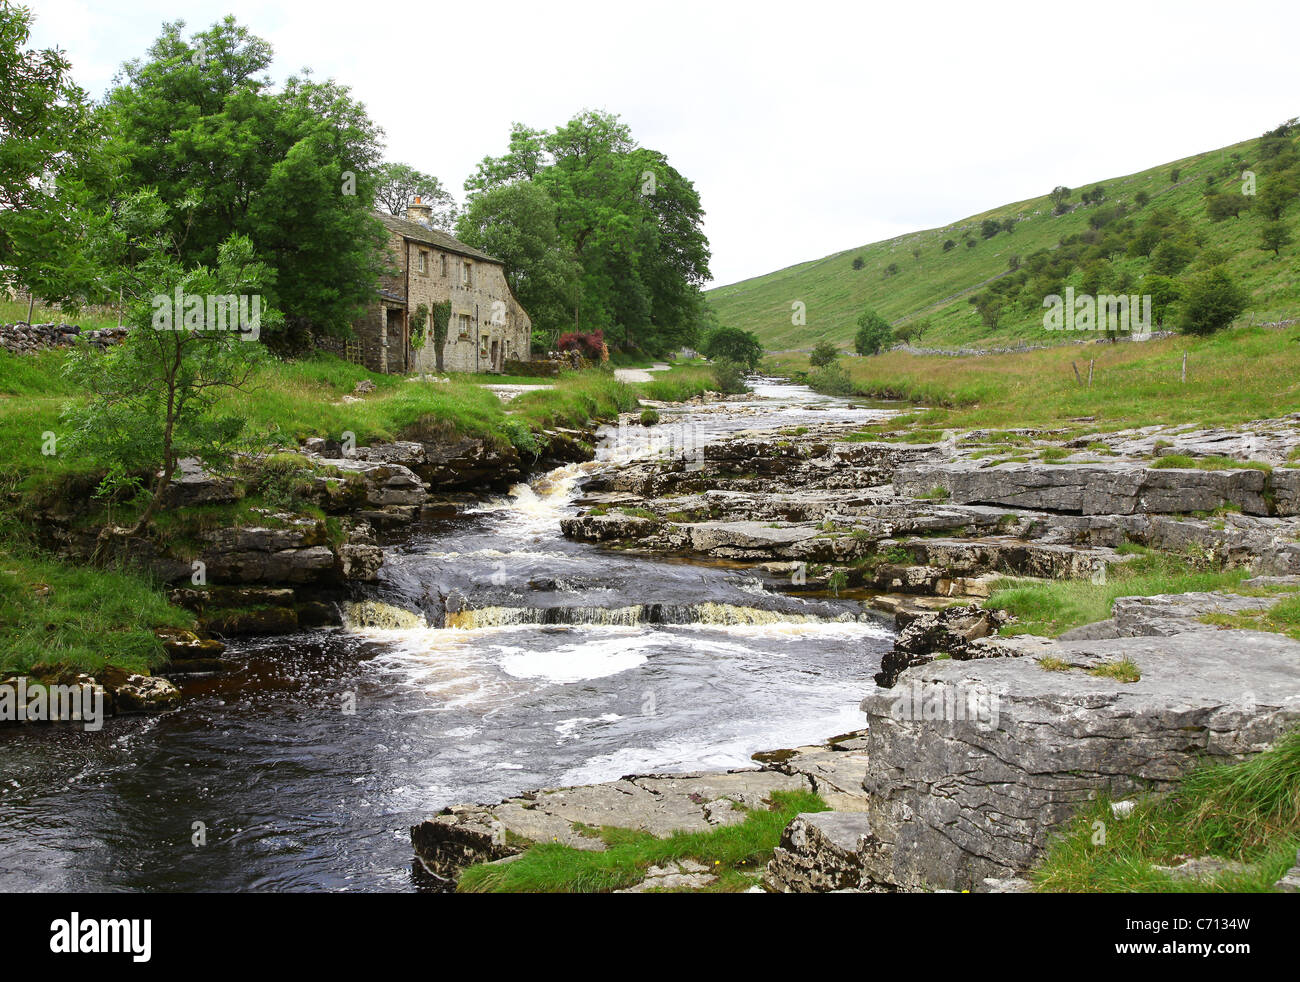 The River Wharfe running past New House, Langstroth Dale, North Yorkshire, Yorkshire Dales National Park, England, UK Stock Photo